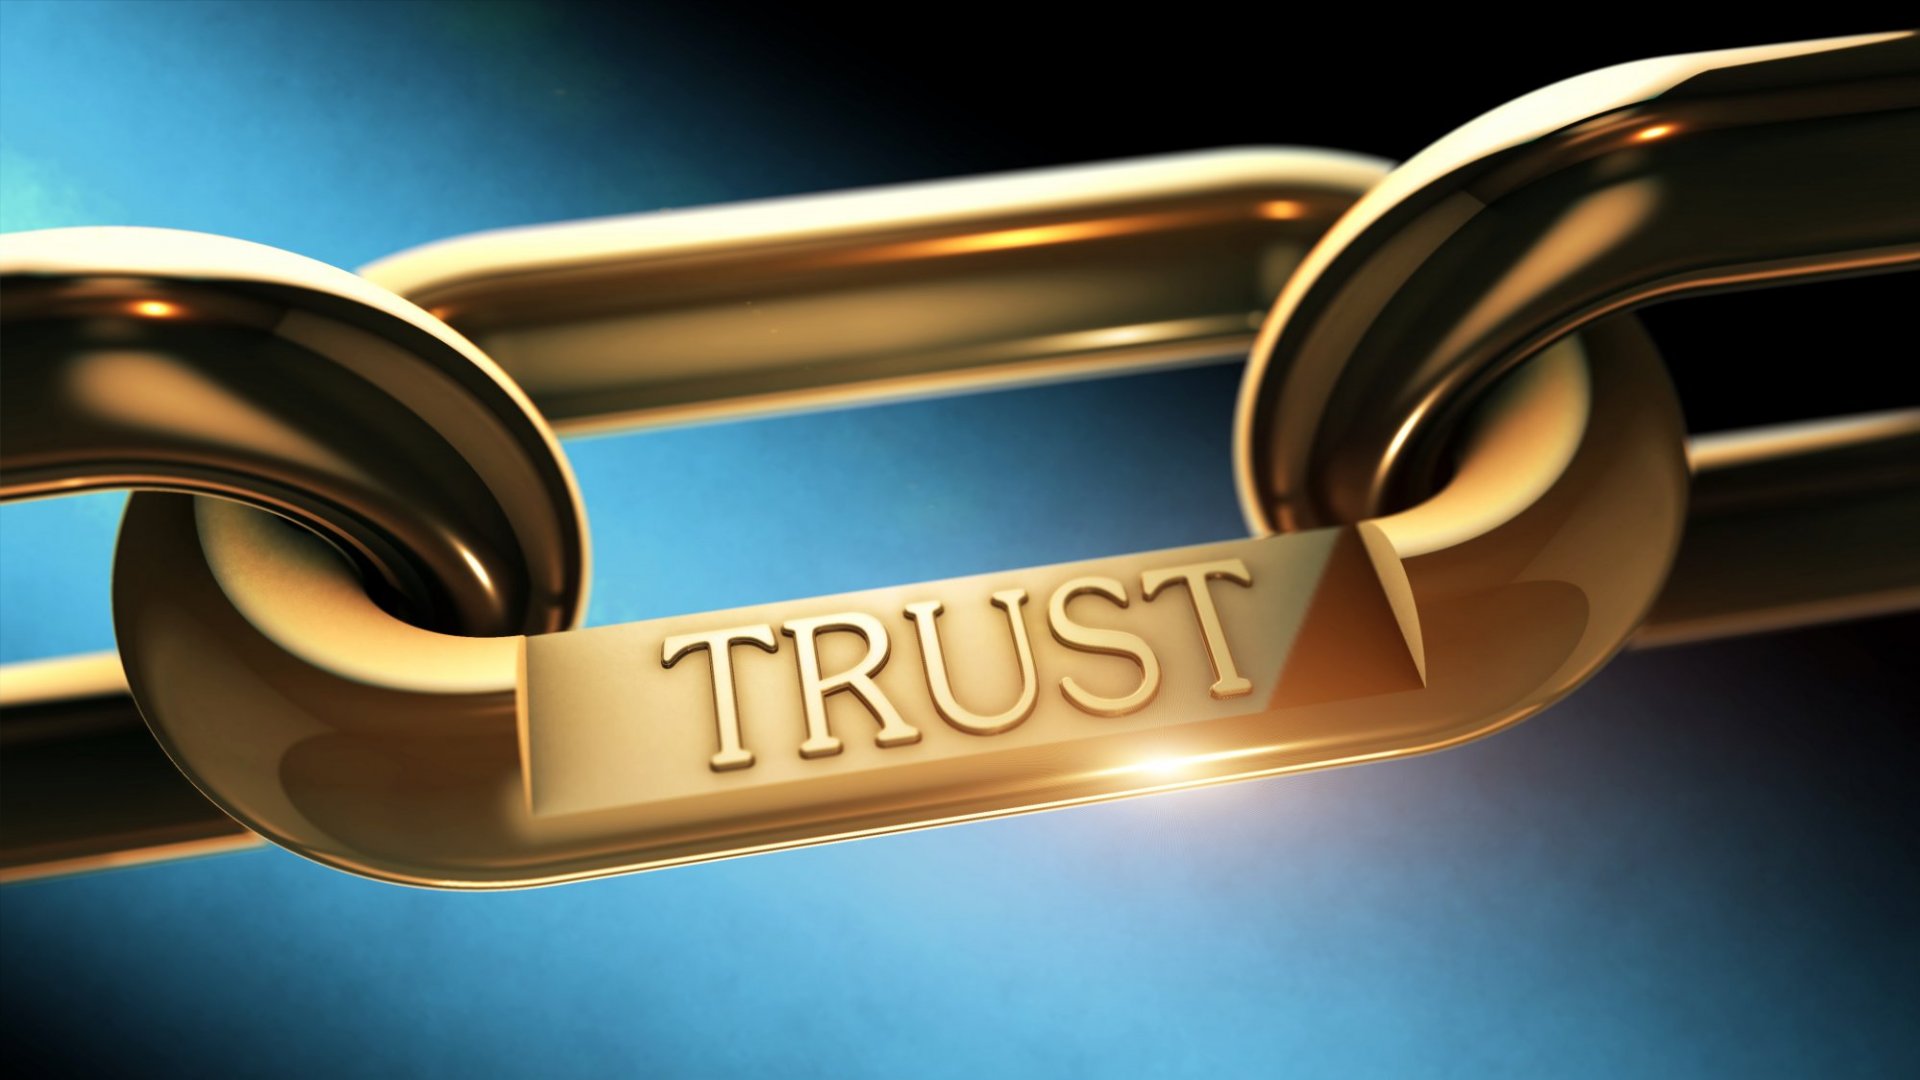 Trust is the connector of evidence and faith